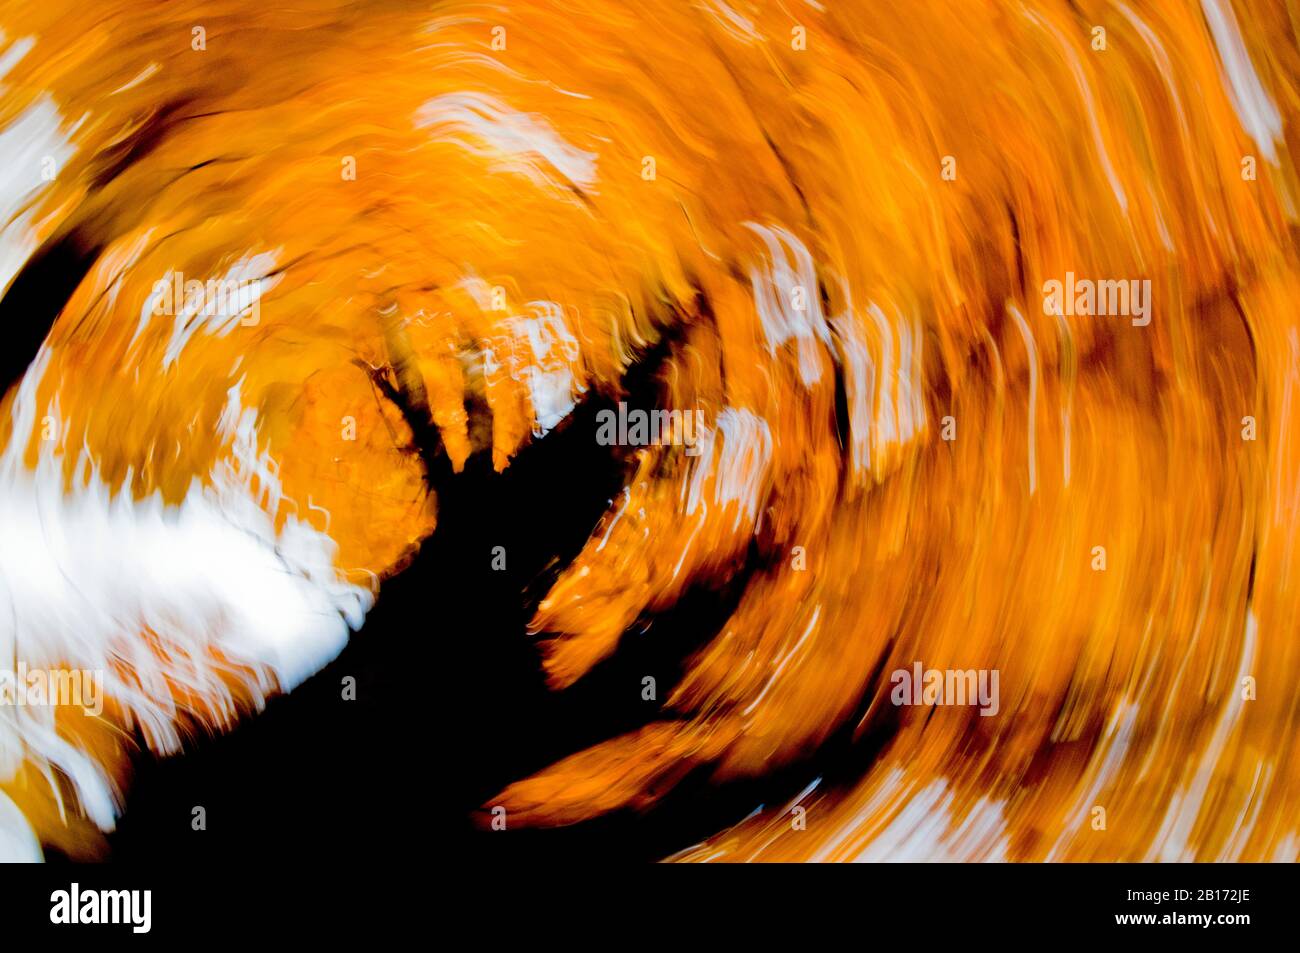 An abstract shot of a black maple in autumn made by shooting at a slow shutter speed while spinning the camera on it's axis. Stock Photo